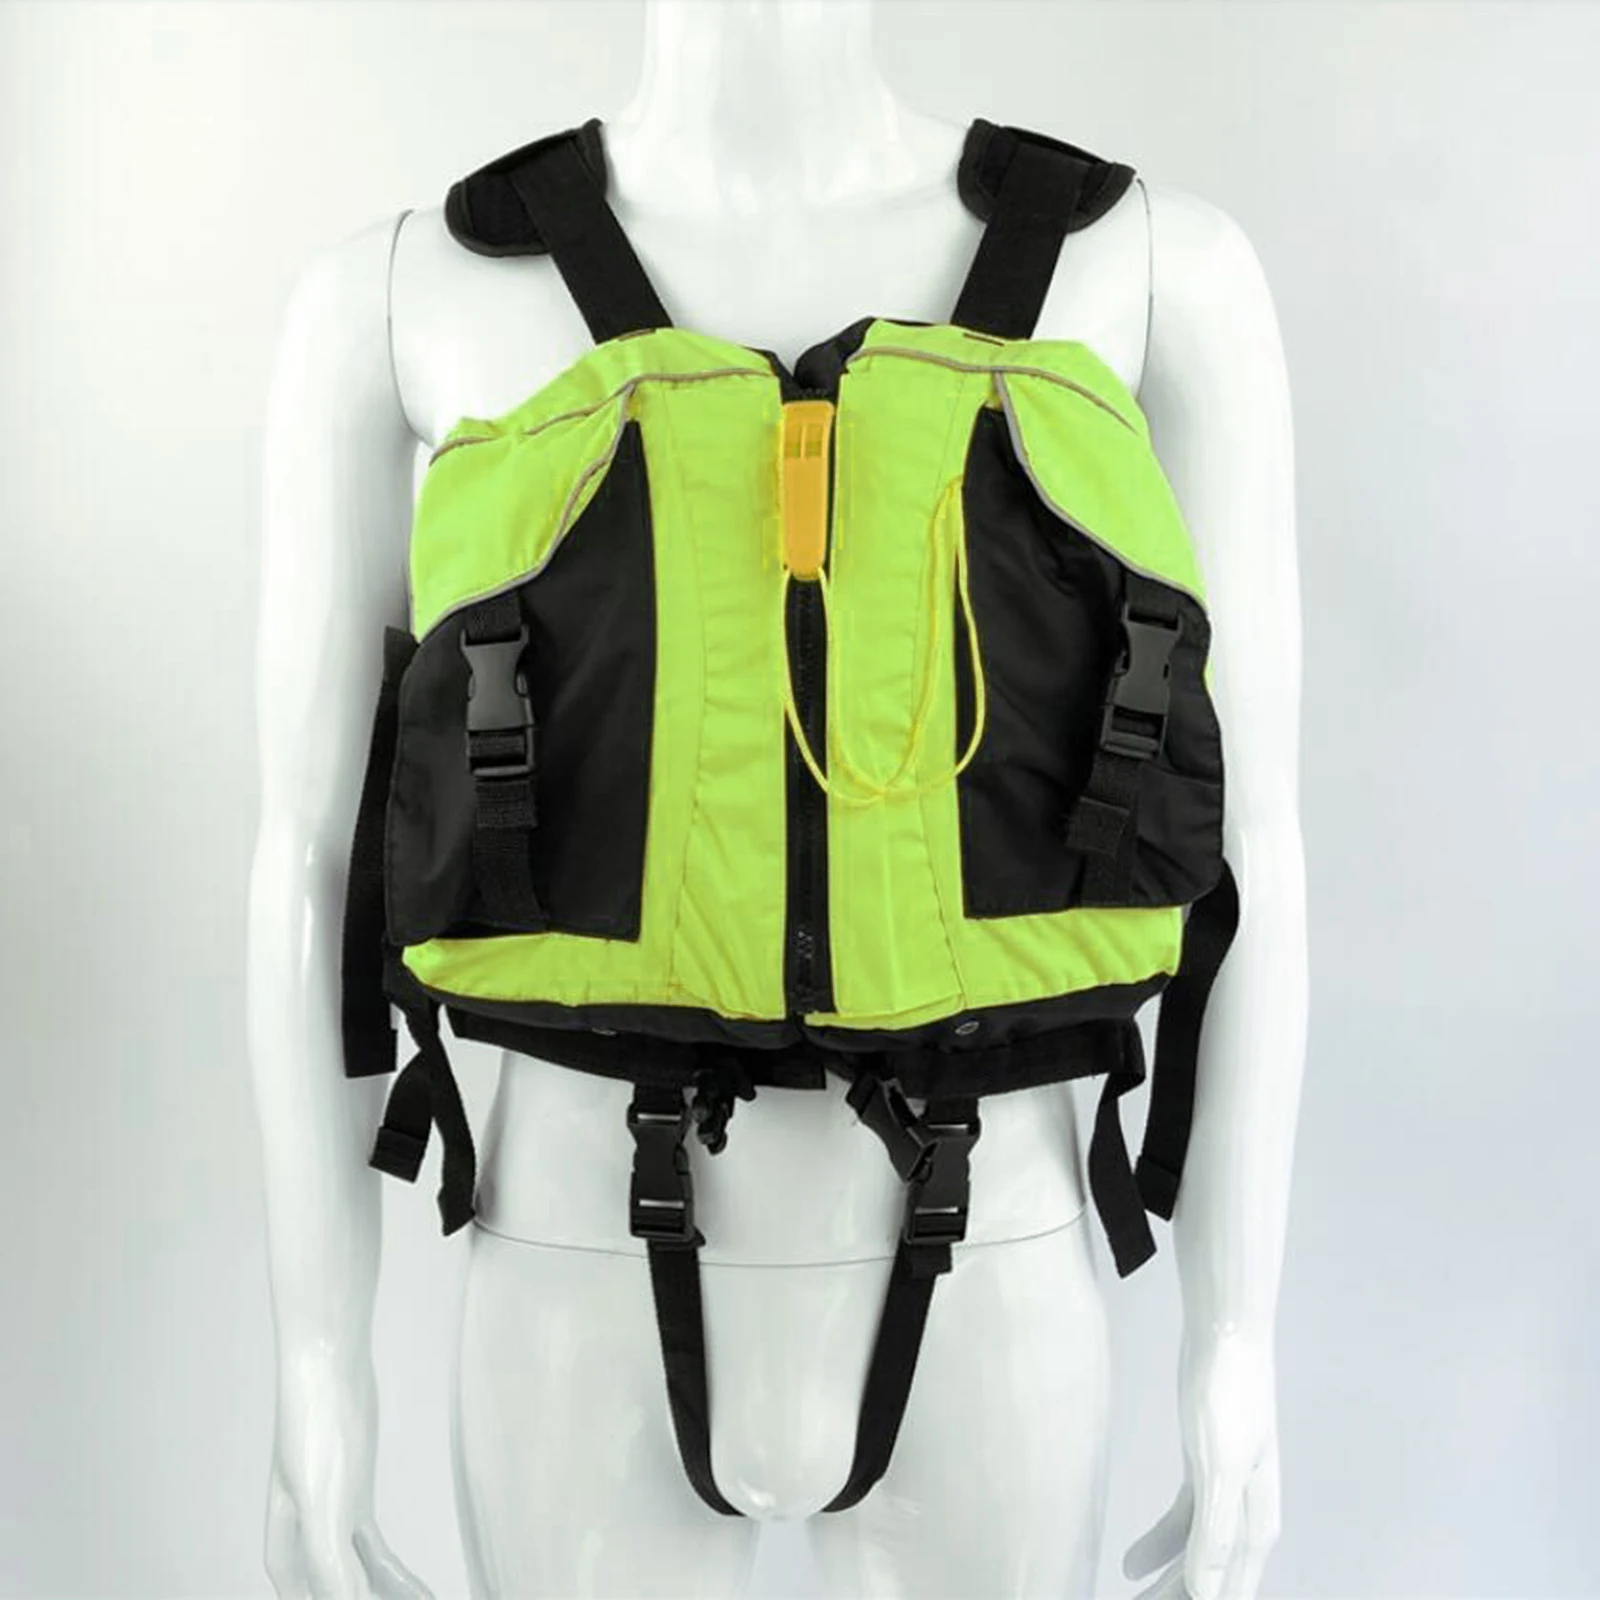 Breathable Life Jacket Life Vest Aid Watersport Personal Floatation Device